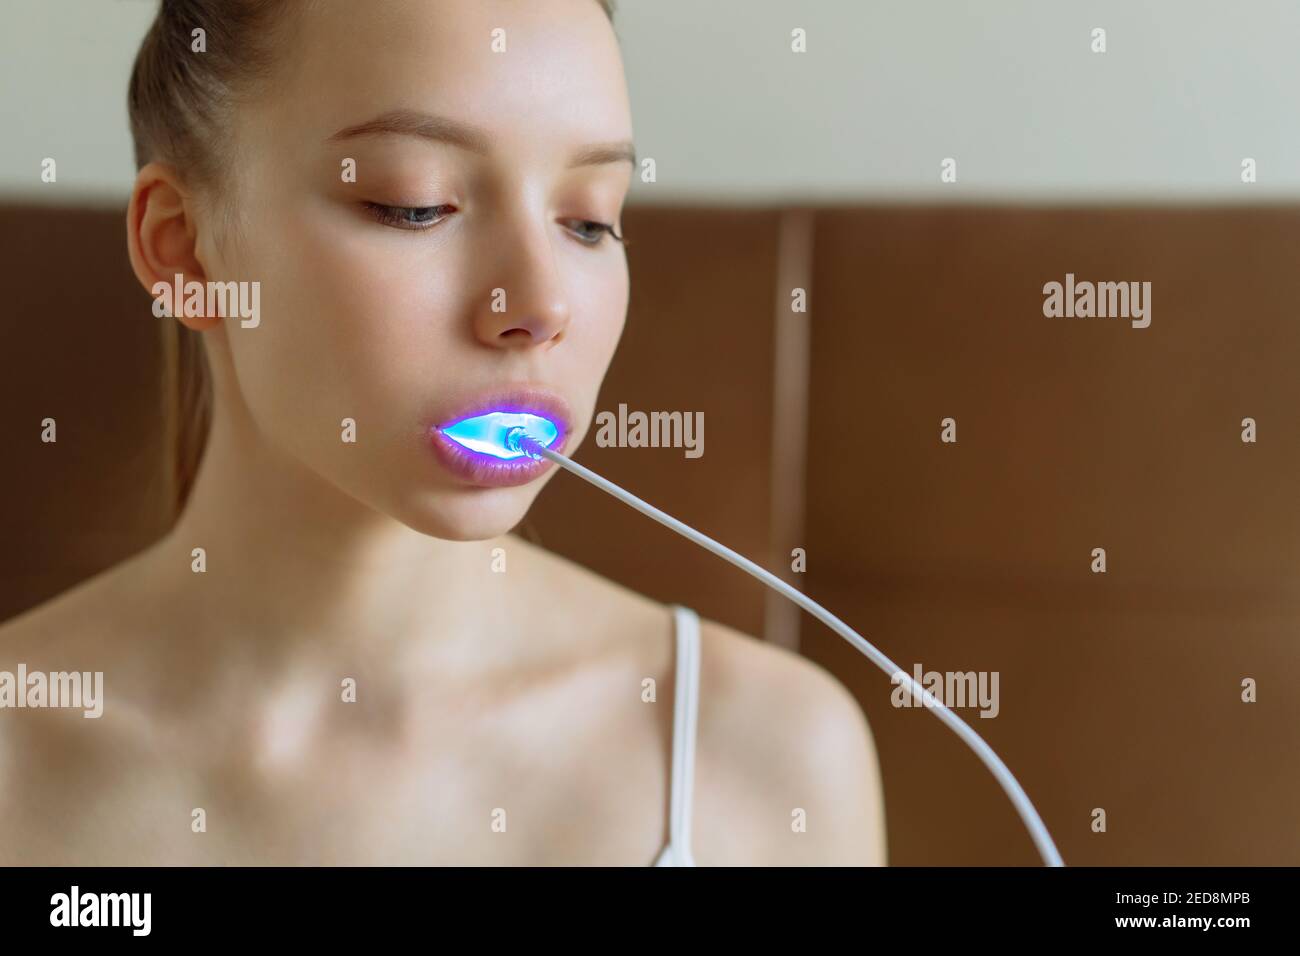 A young girl is engaged in home teeth whitening. Stock Photo